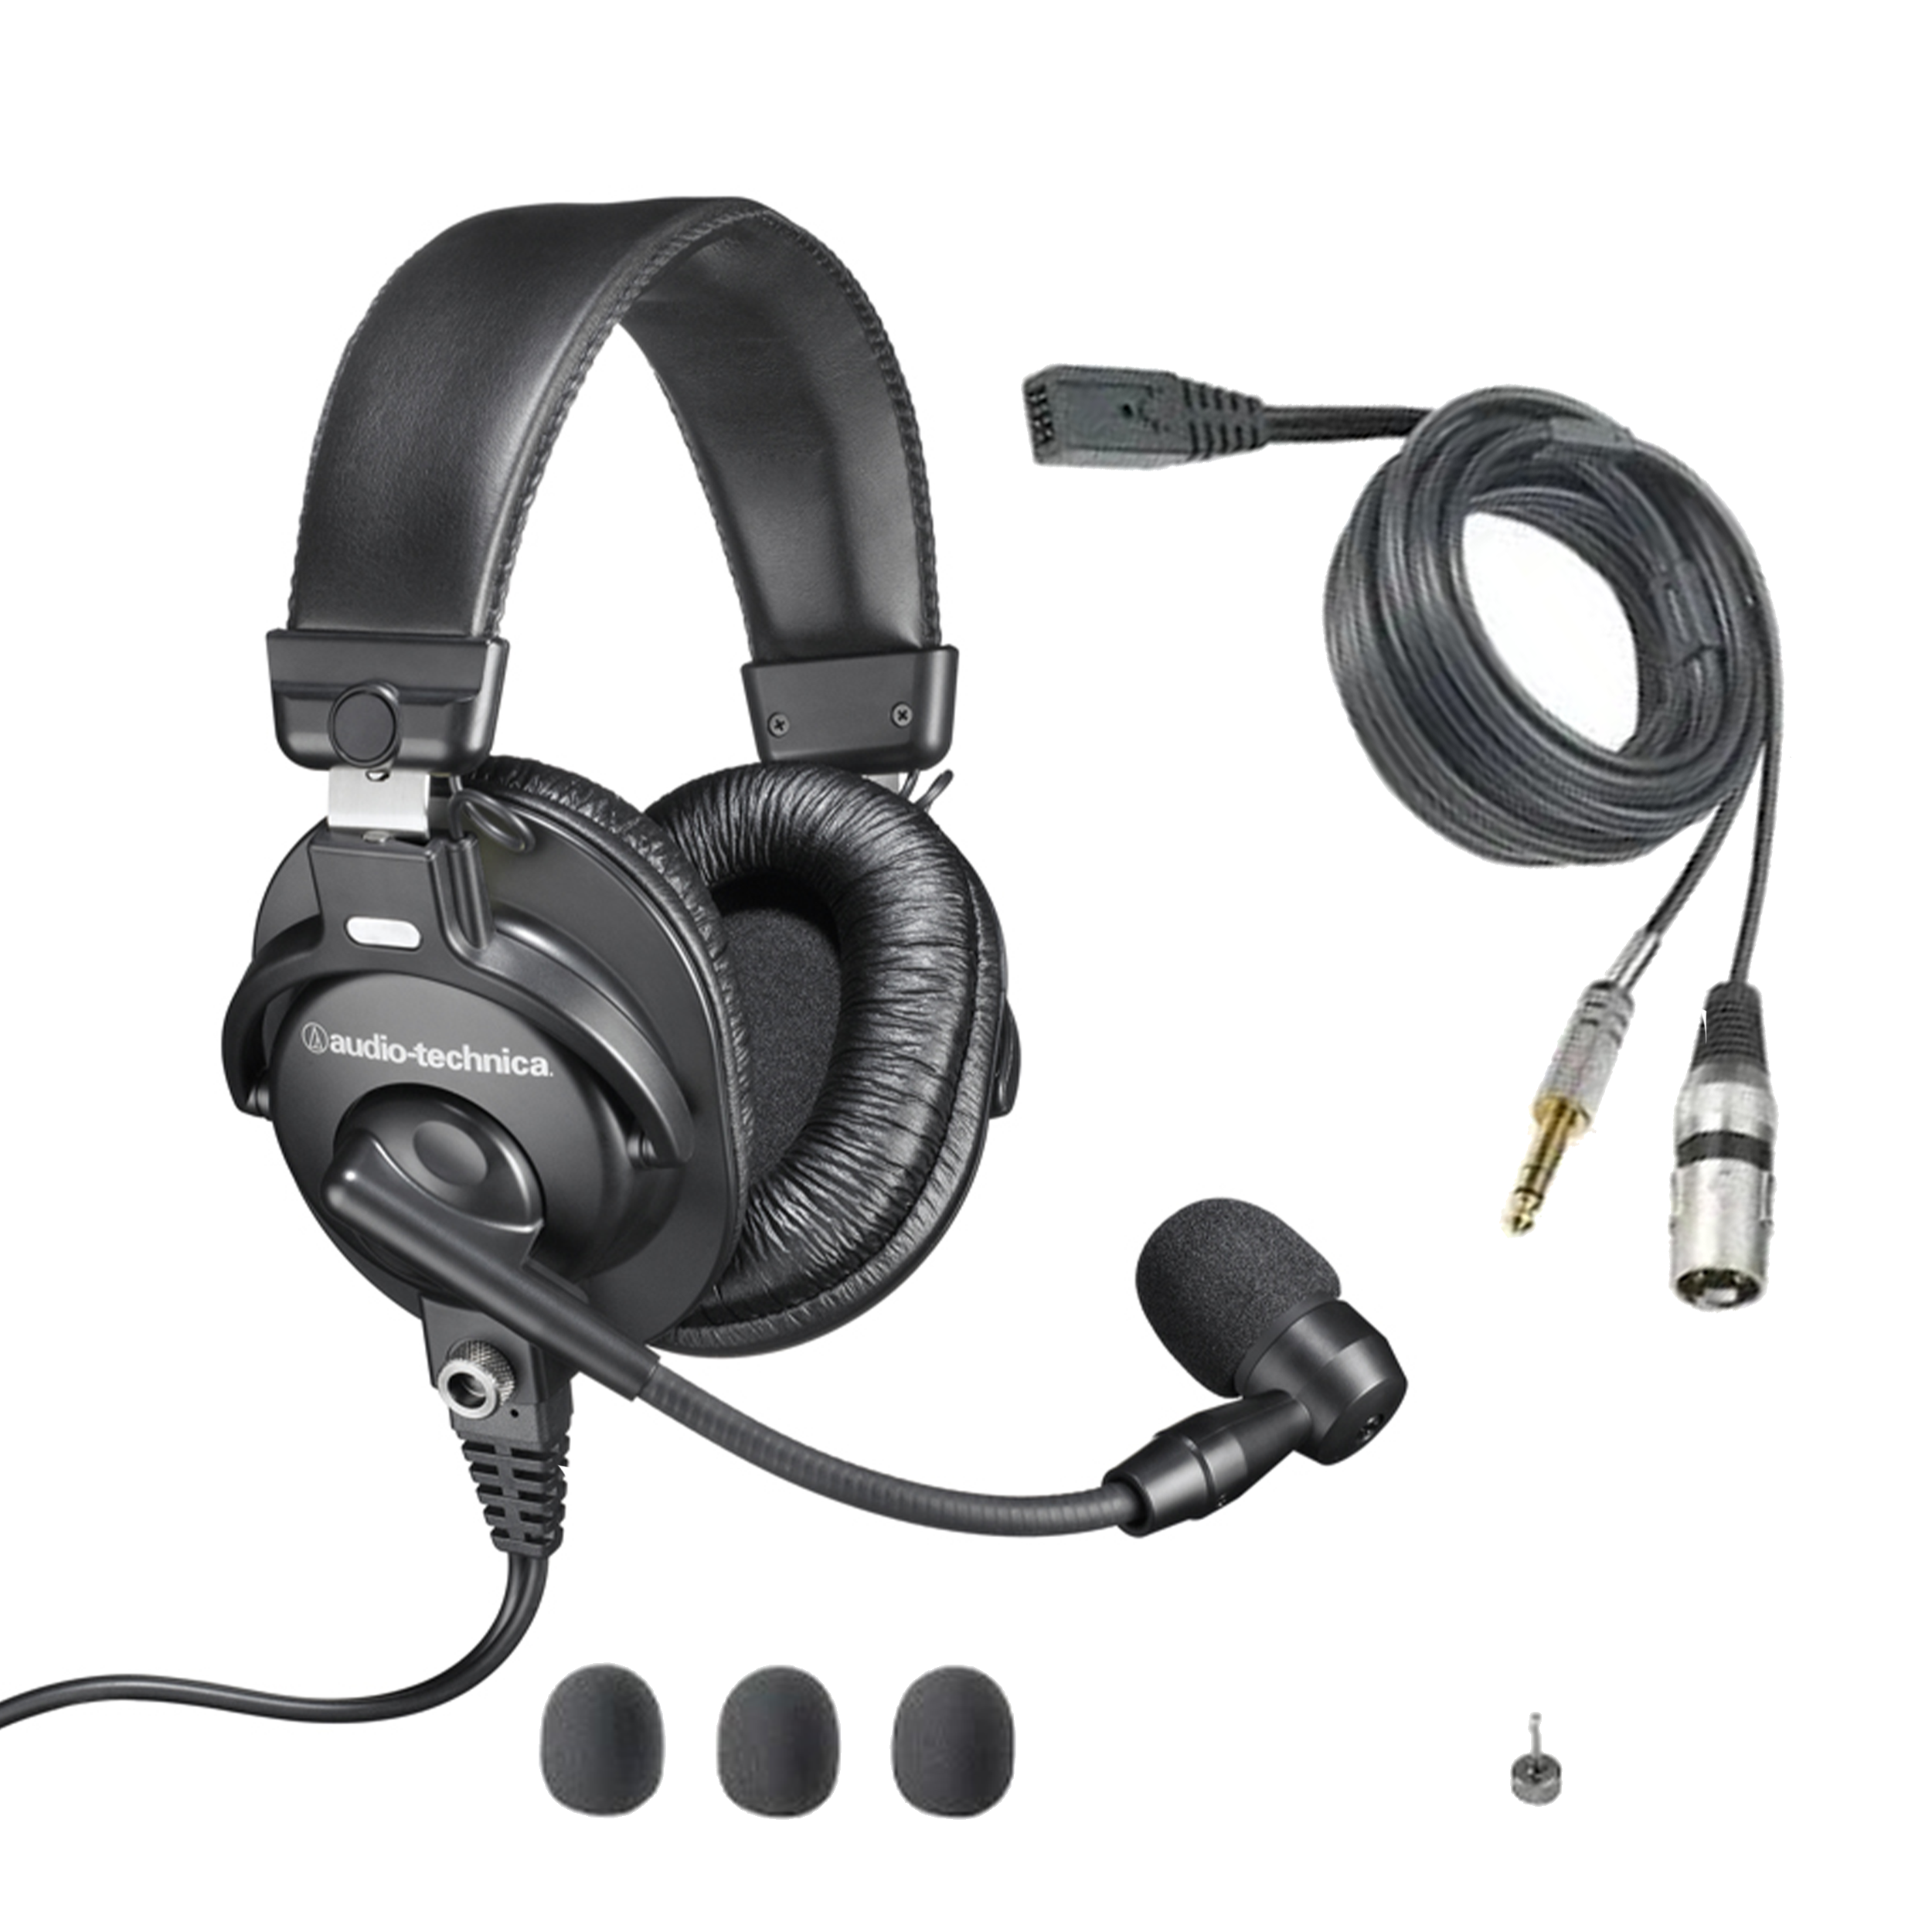 Audio-Technica BPHS1 Broadcast Stereo Headset with Dynamic Boom Microphone